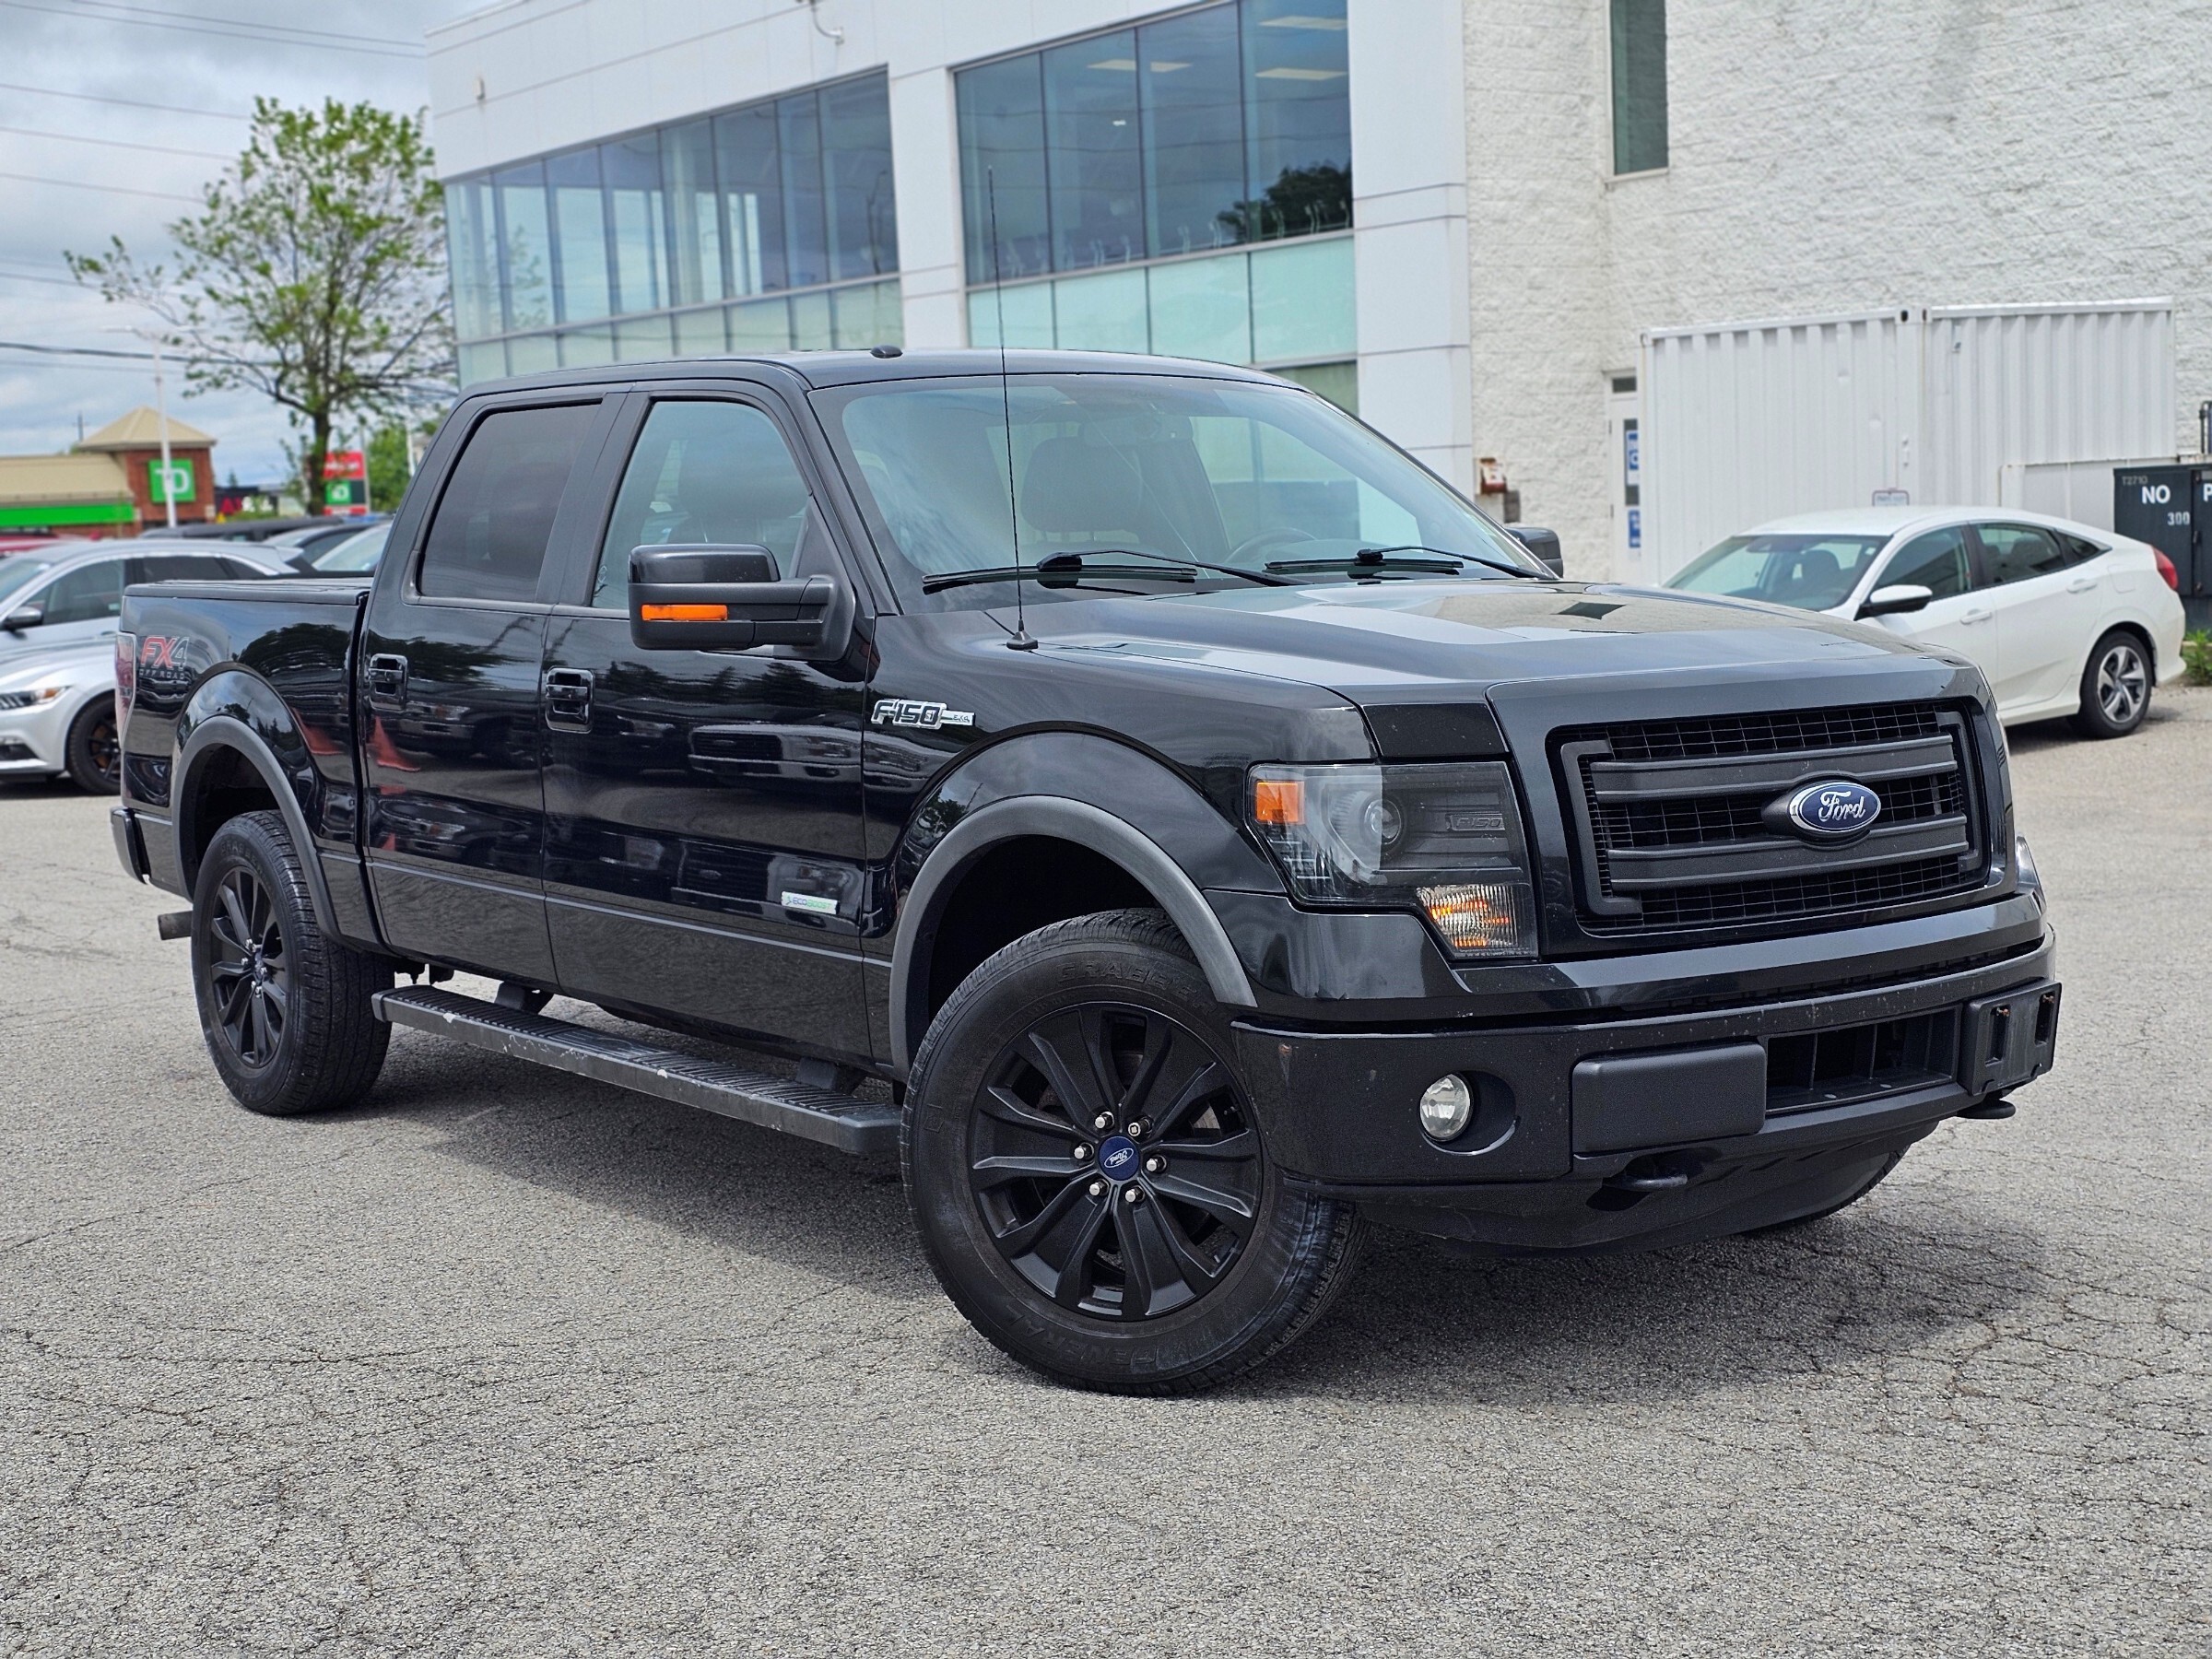 2014 Ford F-150 XLT 3.5 ECOBOOST V6 | 6-SPEED AUTO | VOICE ACTIVAT